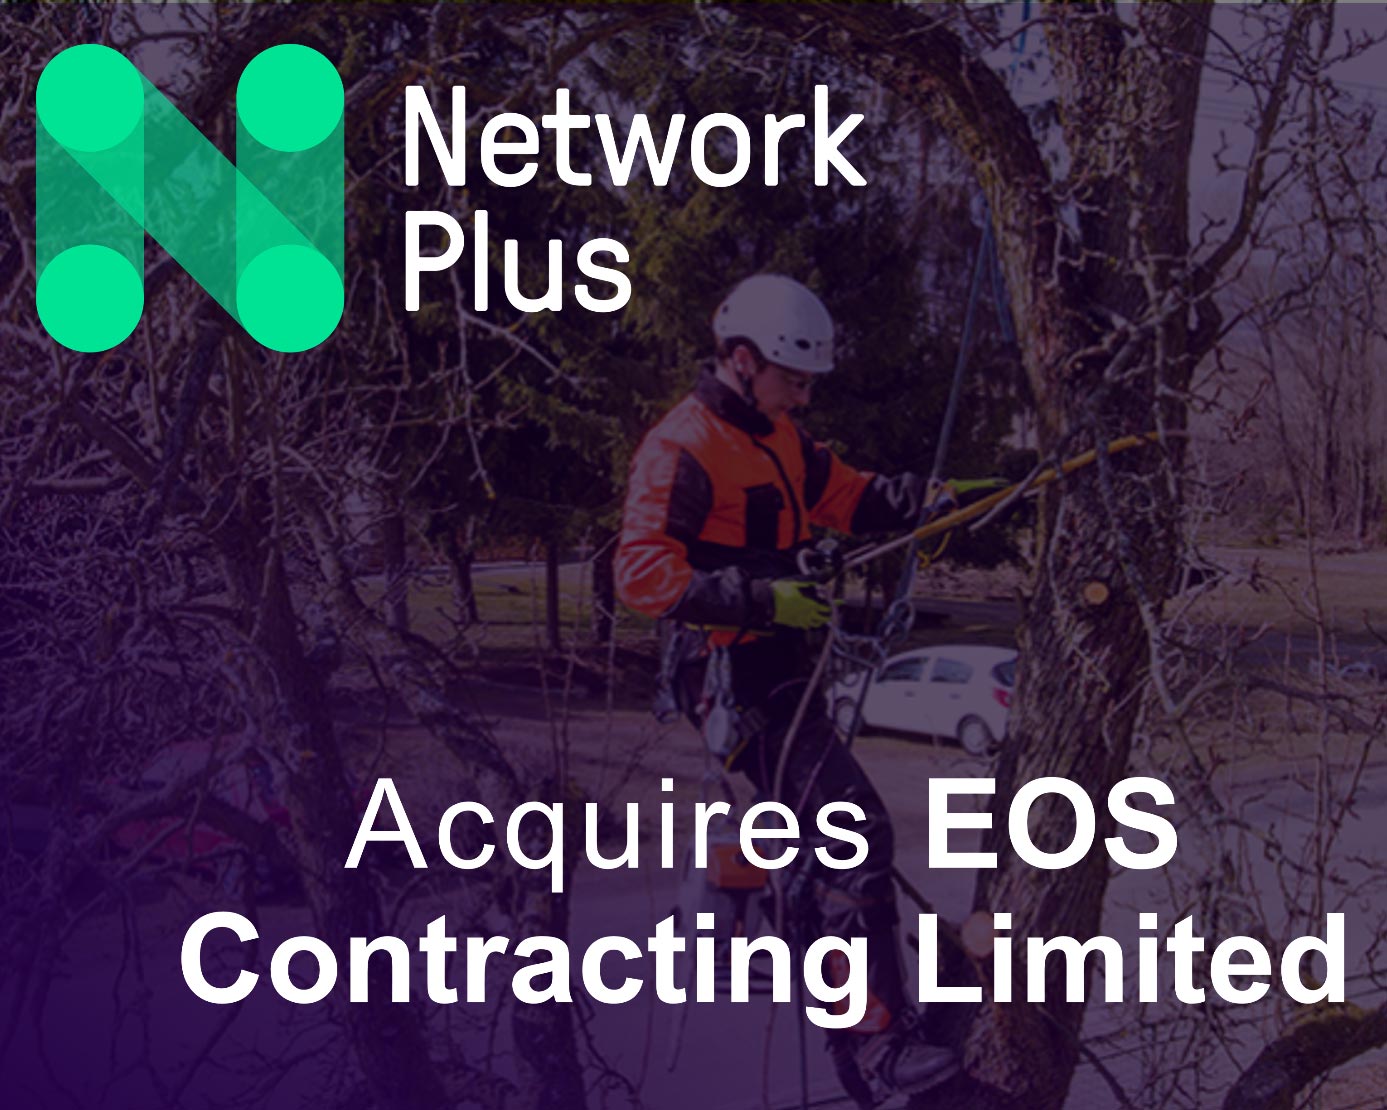 Network Plus Group acquires EOS Contracting Limited